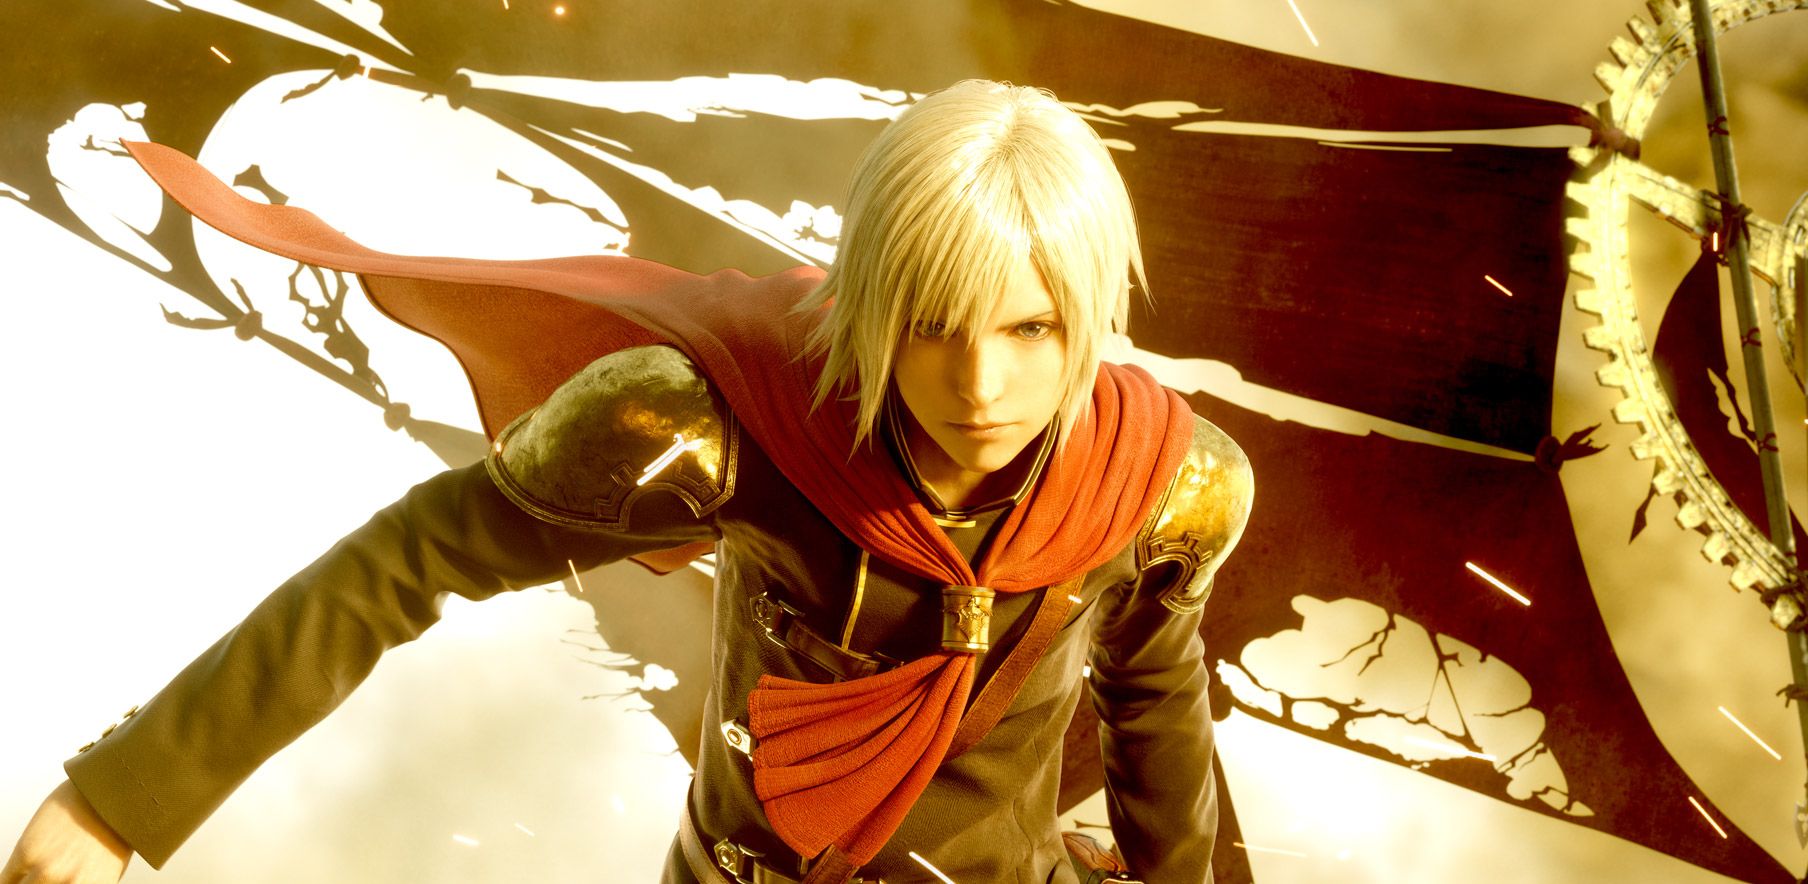 NYCC: Final Fantasy Type 0 HD Hands On With A Title Revived